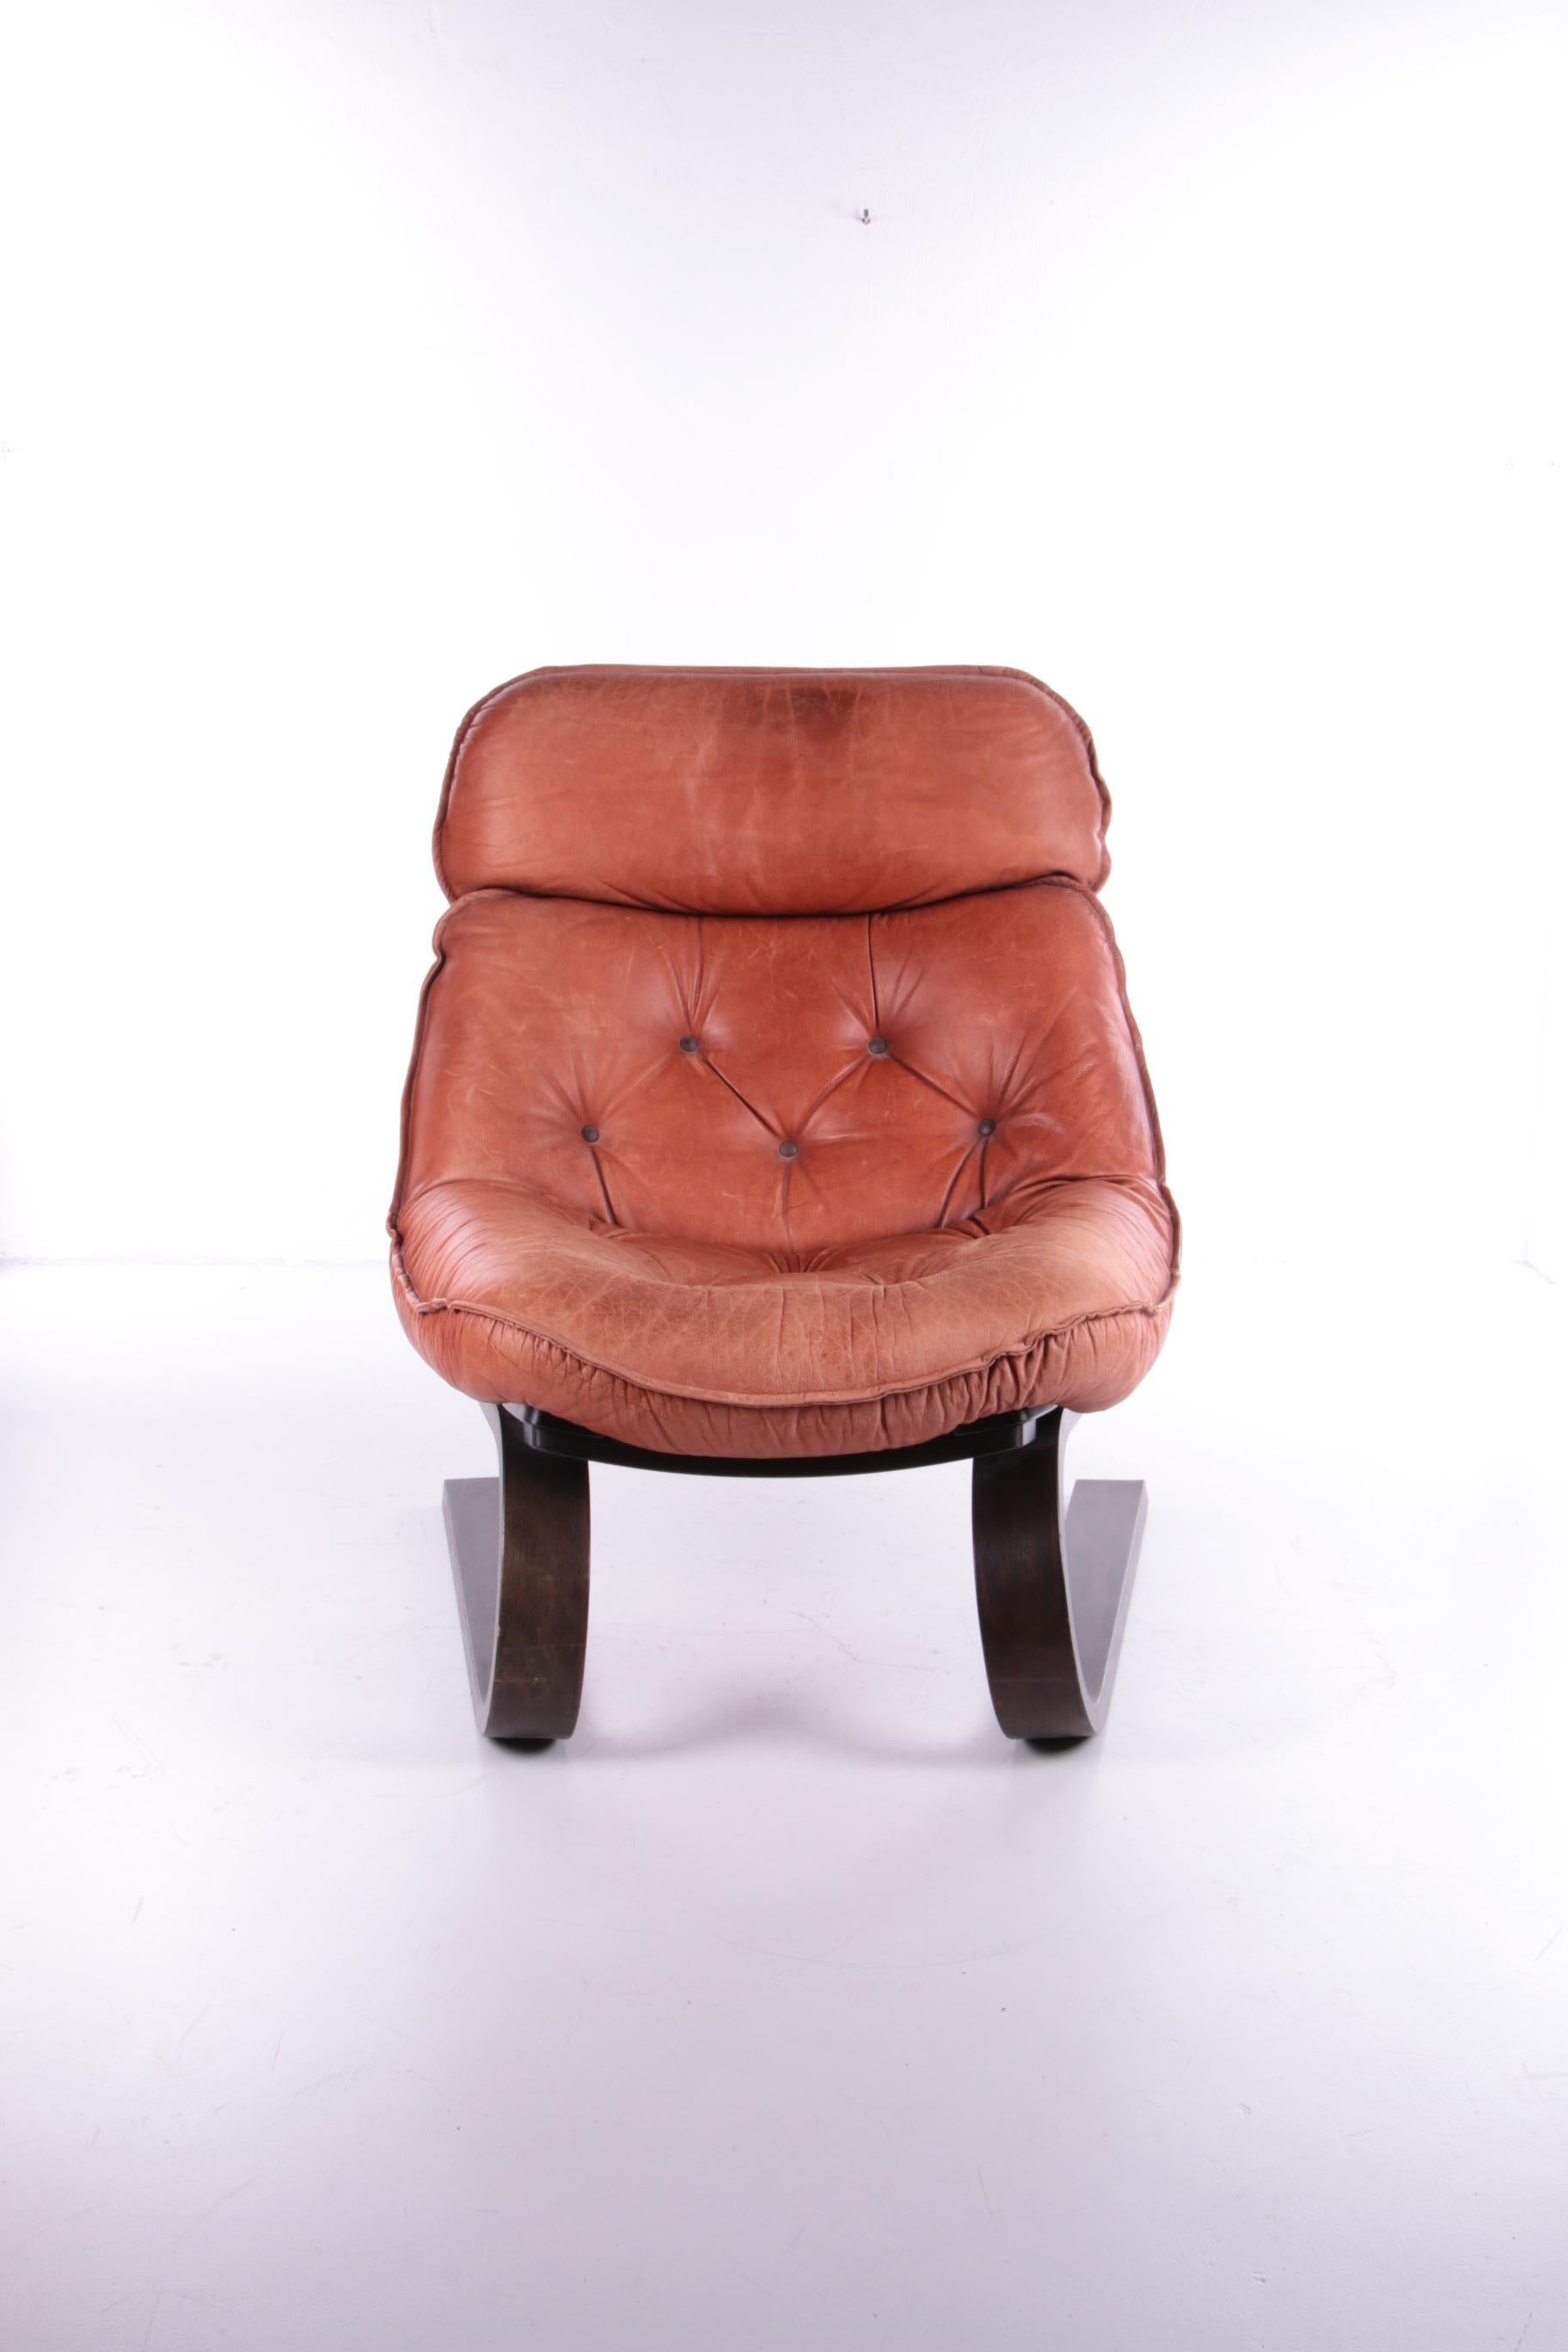 Very beautiful and special lounge chair attributed to Brazil 1970.

The chair is made of curved brown plywood and has a cow leather seat supported by a firm back and with brown leather pillow.

The chair is in fantastic original condition and